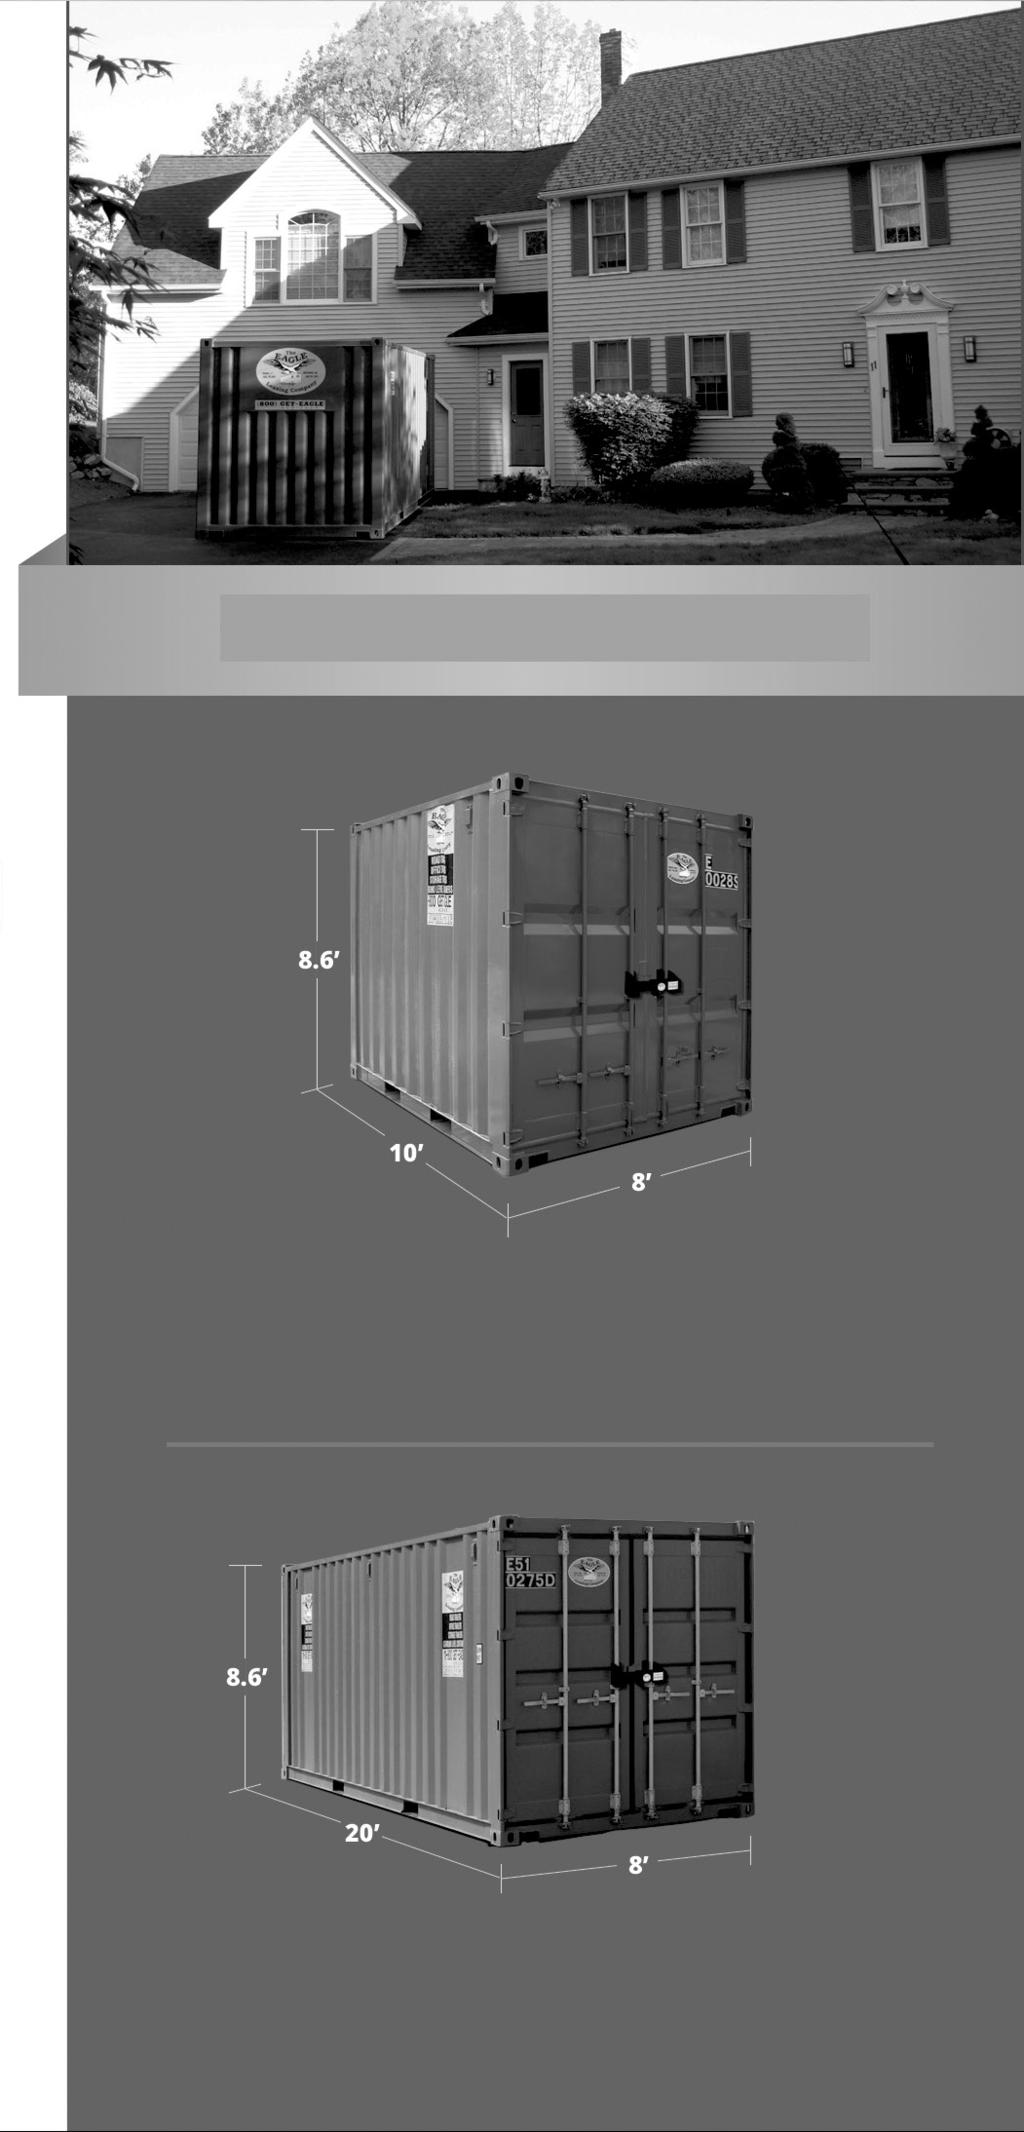 RESIDENTIAL STORAGE SOLUTIONS Eagle Leasing offers portable storage containers ideal for all residential storage needs.